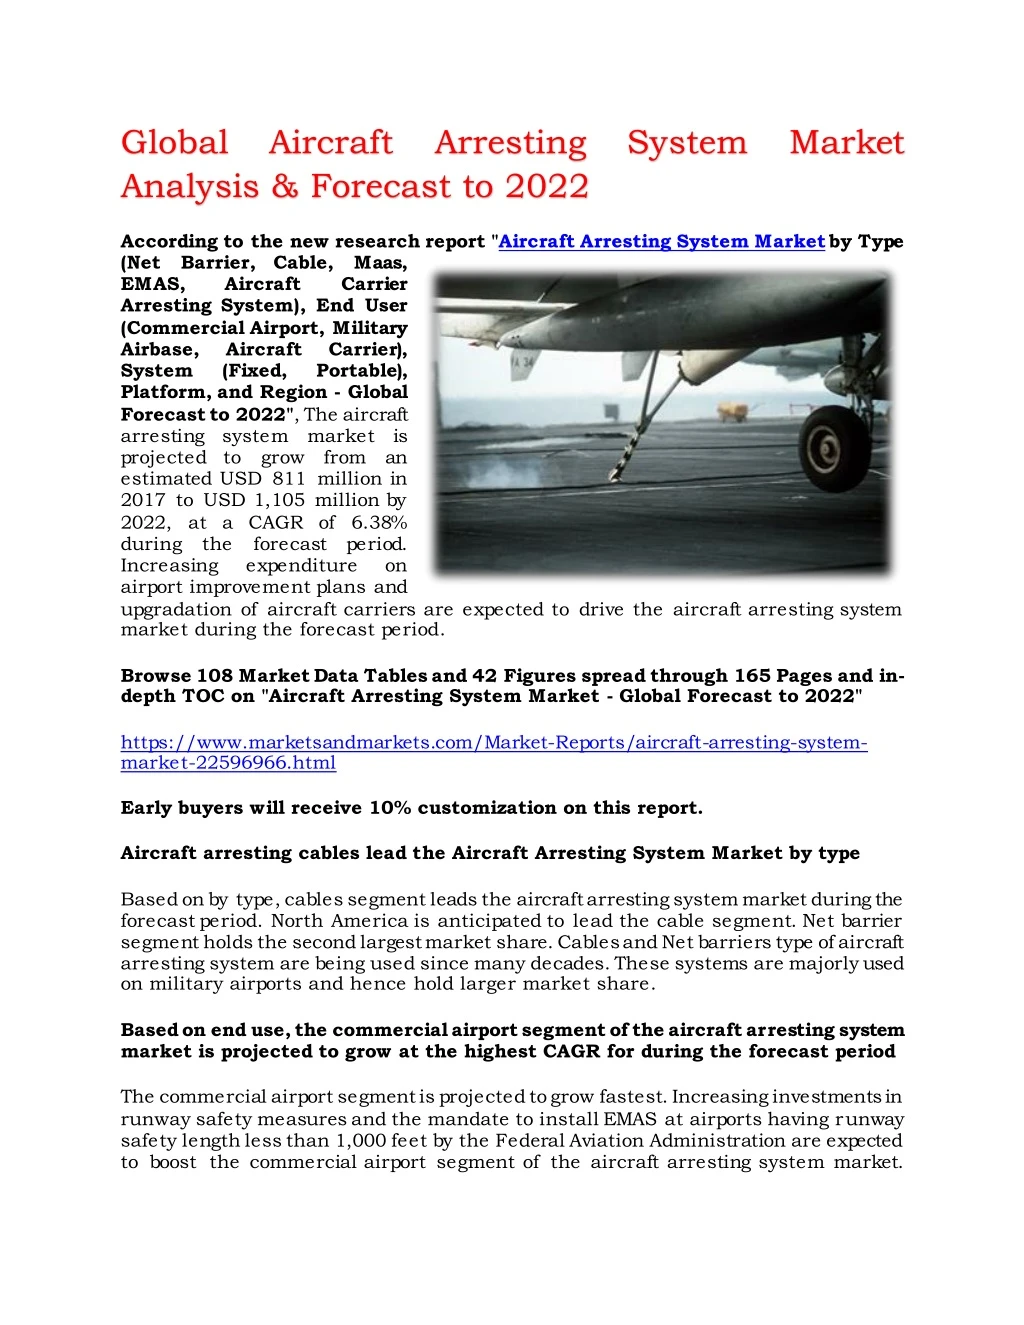 global aircraft analysis forecast to 2022